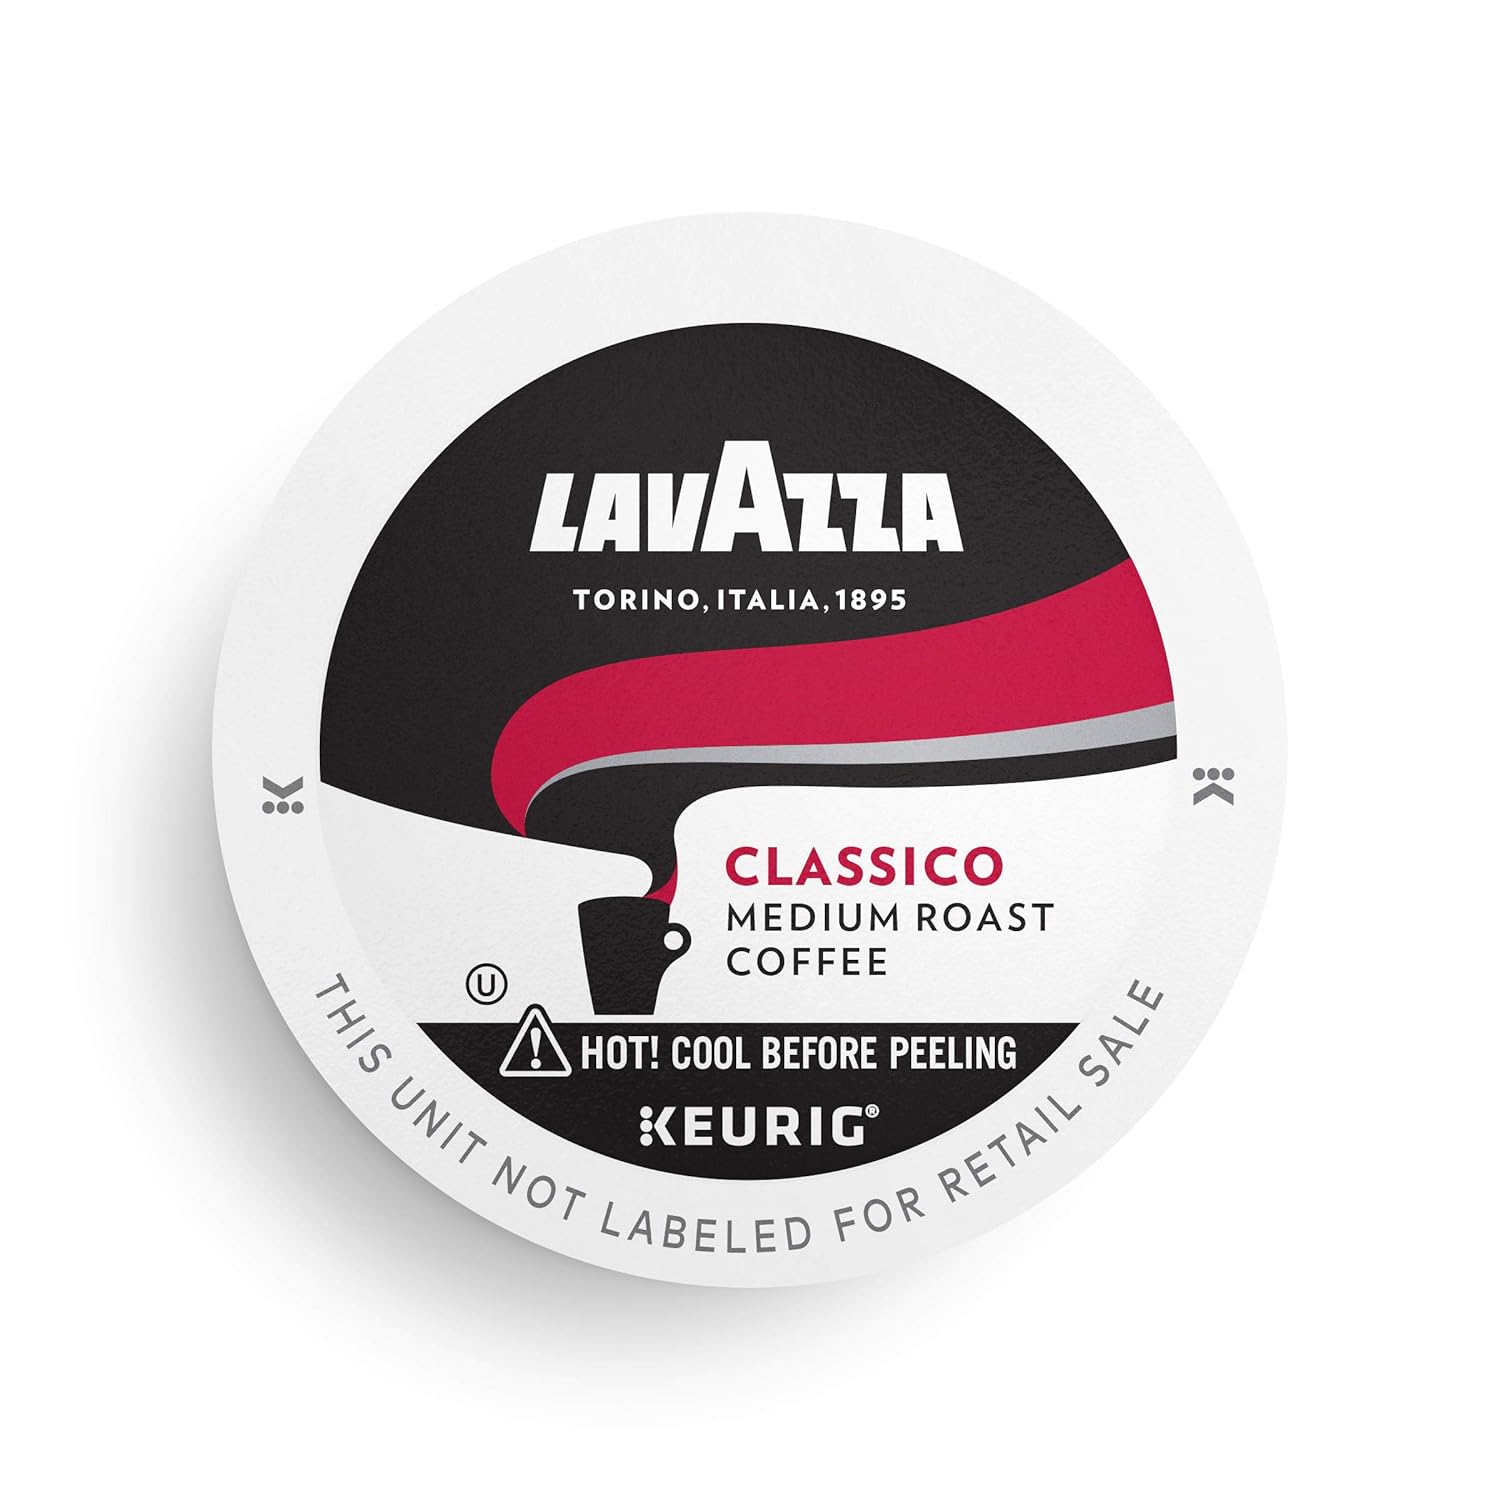 Lavazza Classico Single-Serve Coffee K-Cup® Pods for Keurig® Brewer, Medium Roast, Caps Classico, 16 Count Full-bodied medium roast with rich flavor and notes of dried fruit, Value Pack